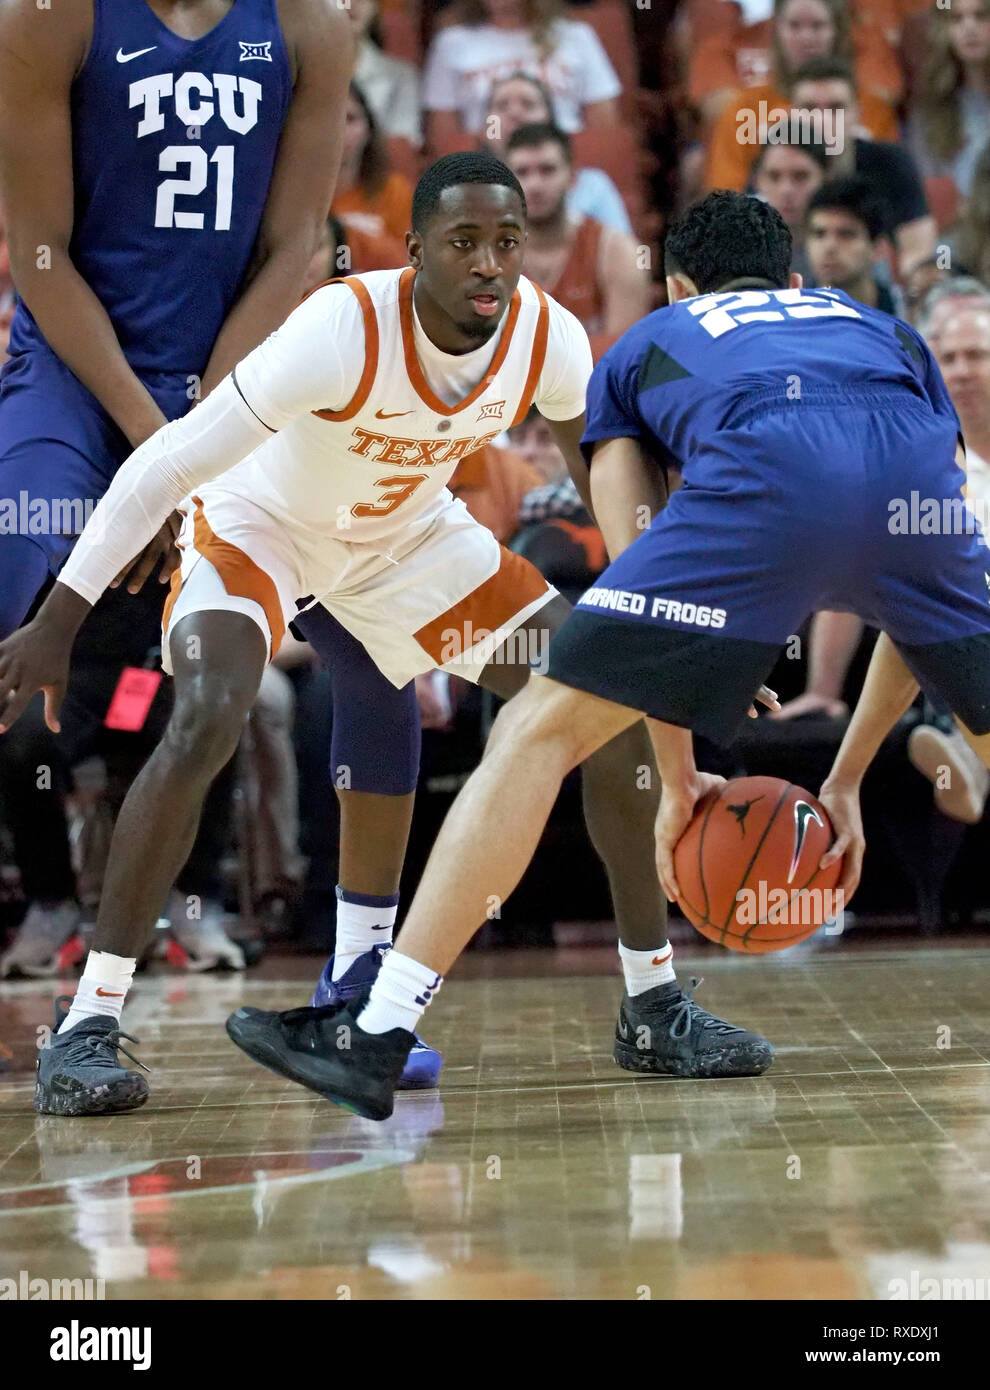 March 9, 2019. Courtney Ramey #3 of the Texas Longhorns in action vs the TCU Horned Frogs at the Frank Erwin Center in Austin Texas. TCU beats Texas 69-54.Robert Backman/Cal Sport Media. Stock Photo